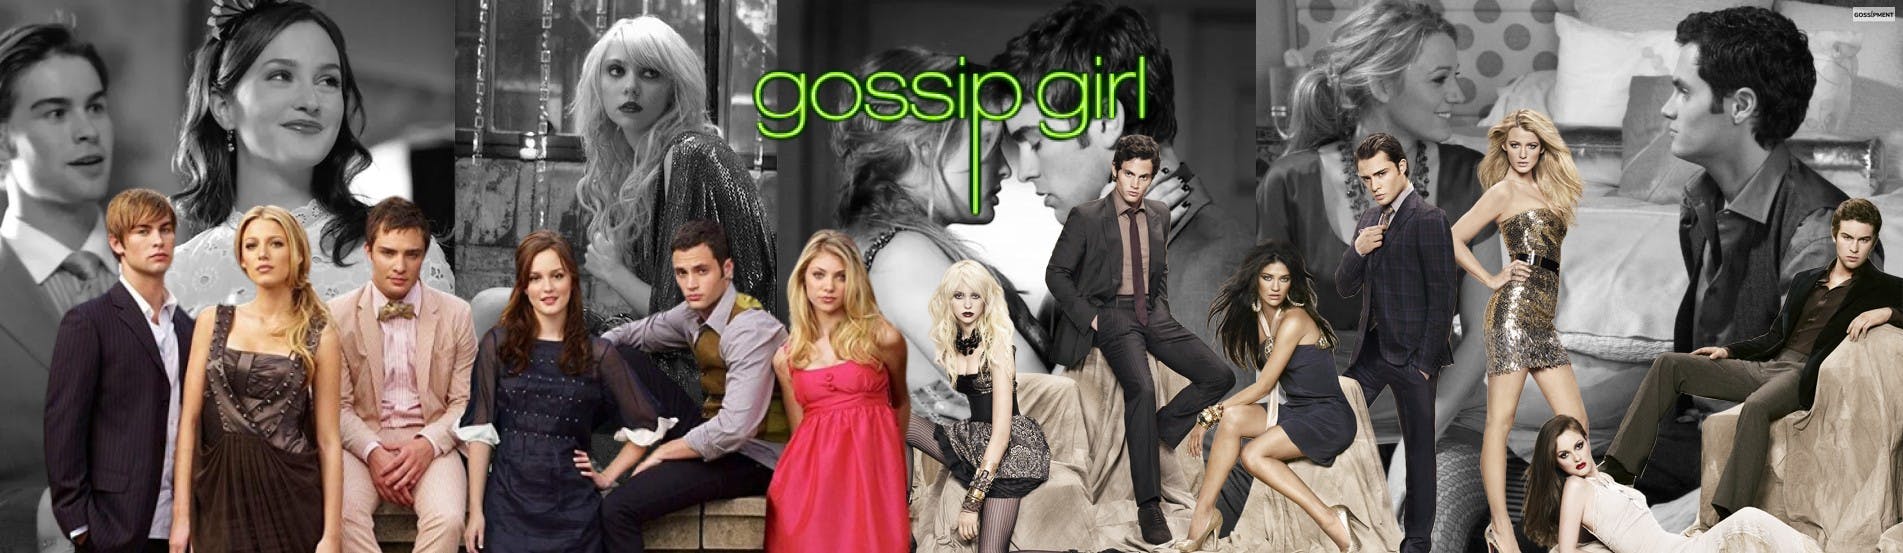 Cover Image for Every Gossip Girl Thanksgiving Episodes, Ranked (Worst To Best): Your Thanksgiving Binge-Watch Schedule Is Here!